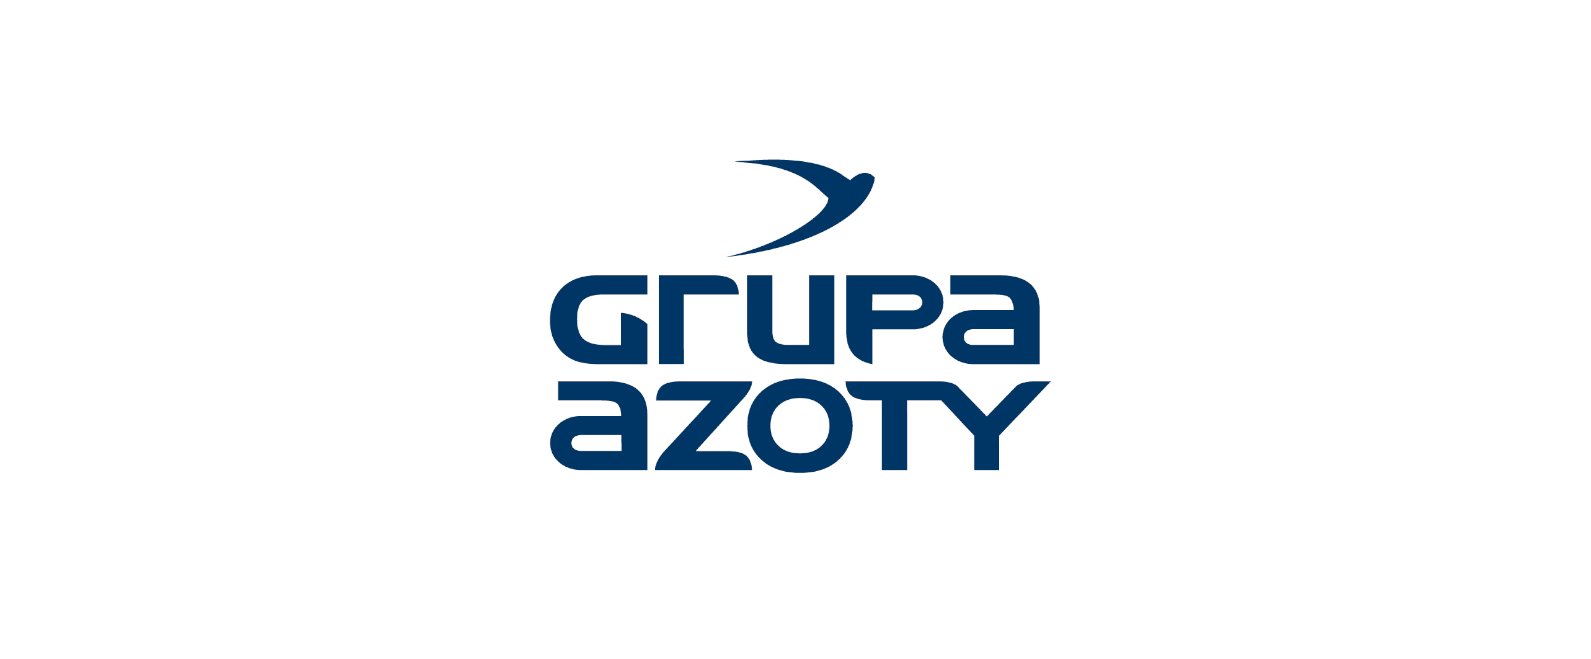 Estimates of financial results of the Grupa Azoty Group for the three and six months ended June 30th 2023 